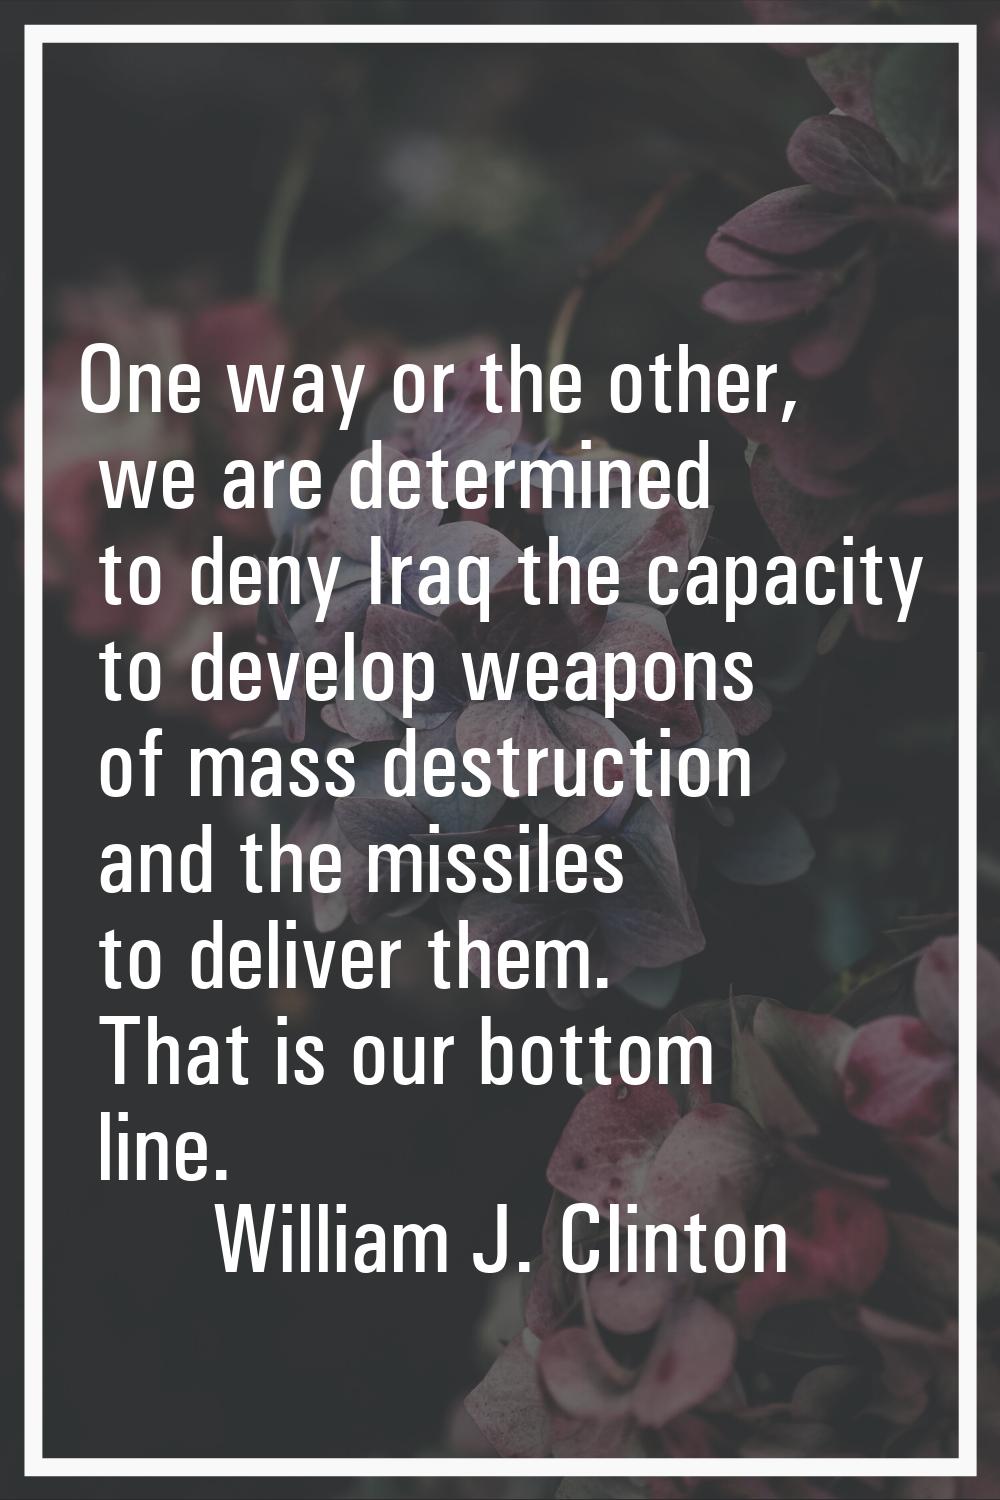 One way or the other, we are determined to deny Iraq the capacity to develop weapons of mass destru